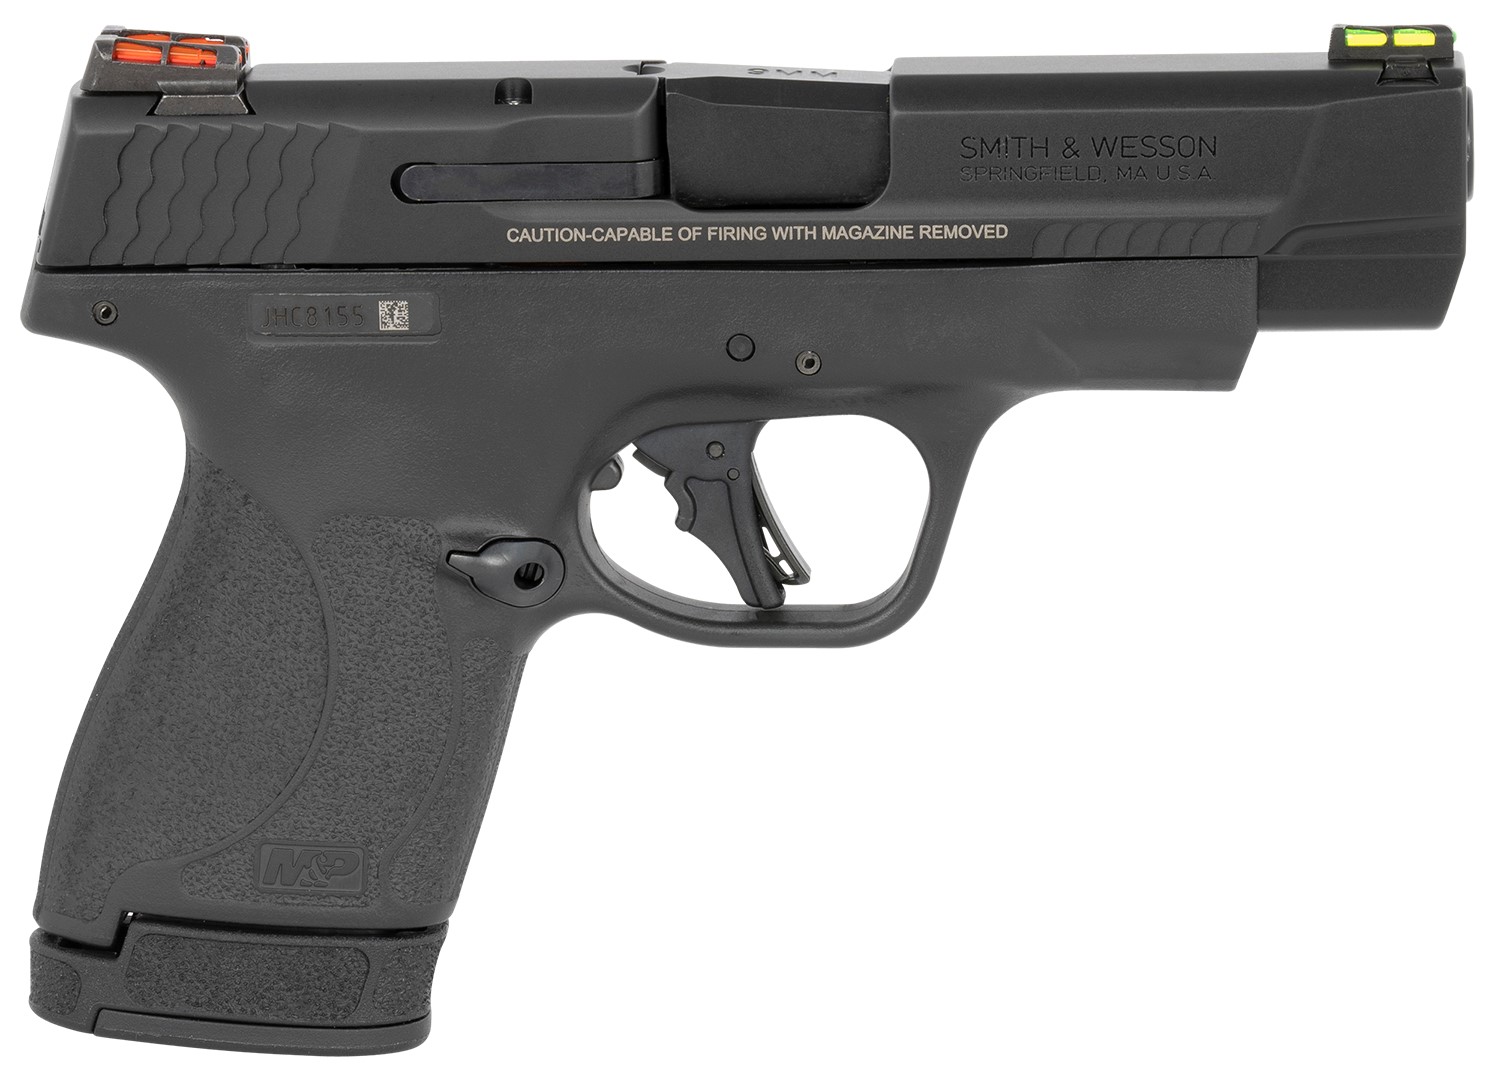 SMITH AND WESSON SHIELD PLUS PC, 9MM 4", 1-13RD, 1-10RD, NO MANUAL SAFETY, FIBER OPTIC SIGHTS